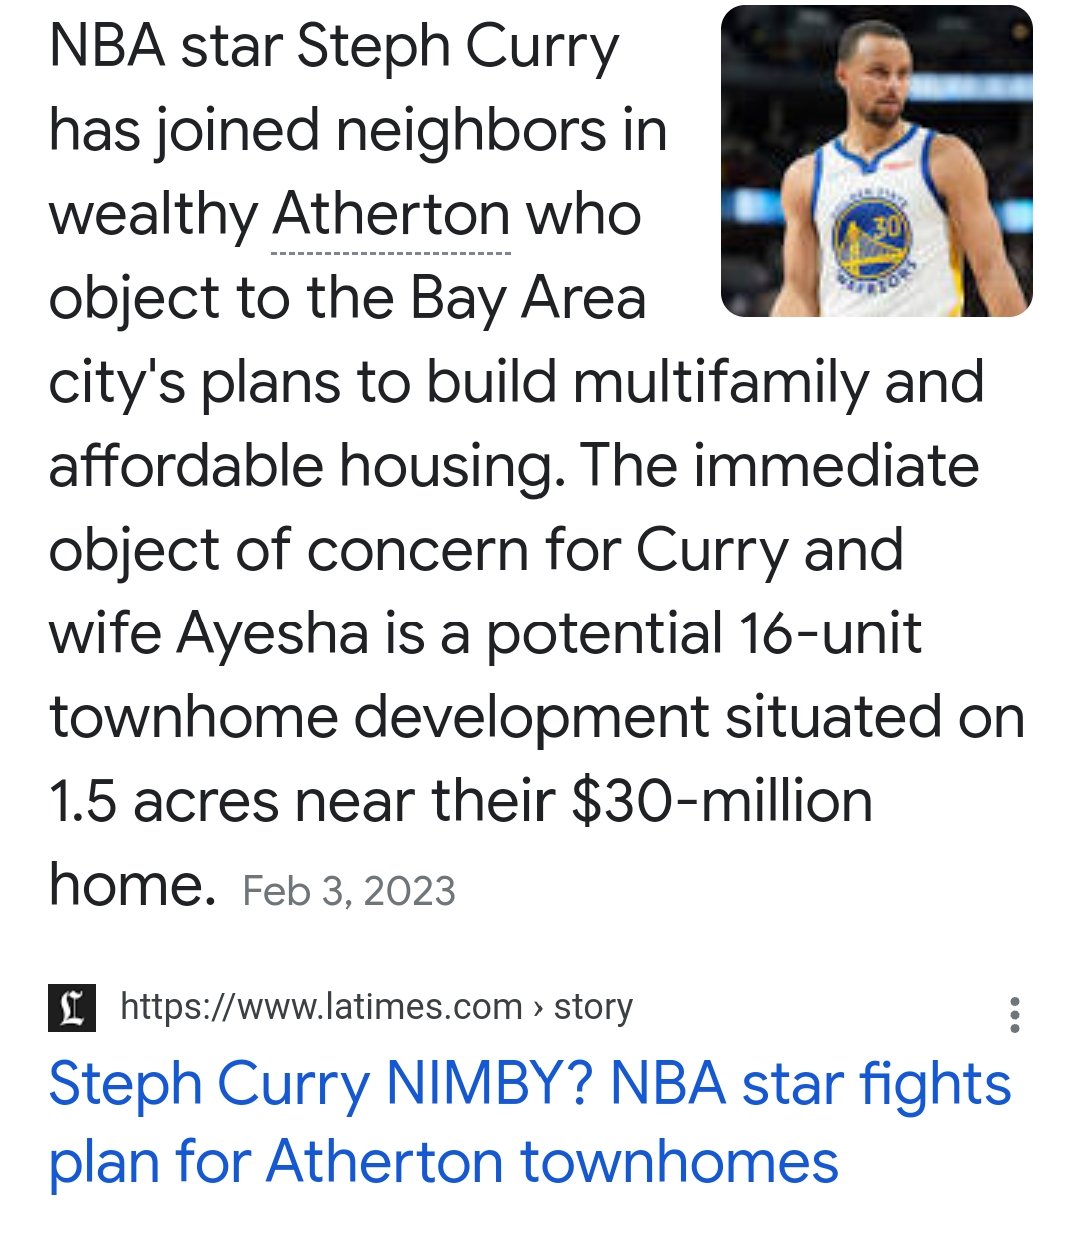 Steph Curry NIMBY? NBA star fights plan for Atherton townhomes